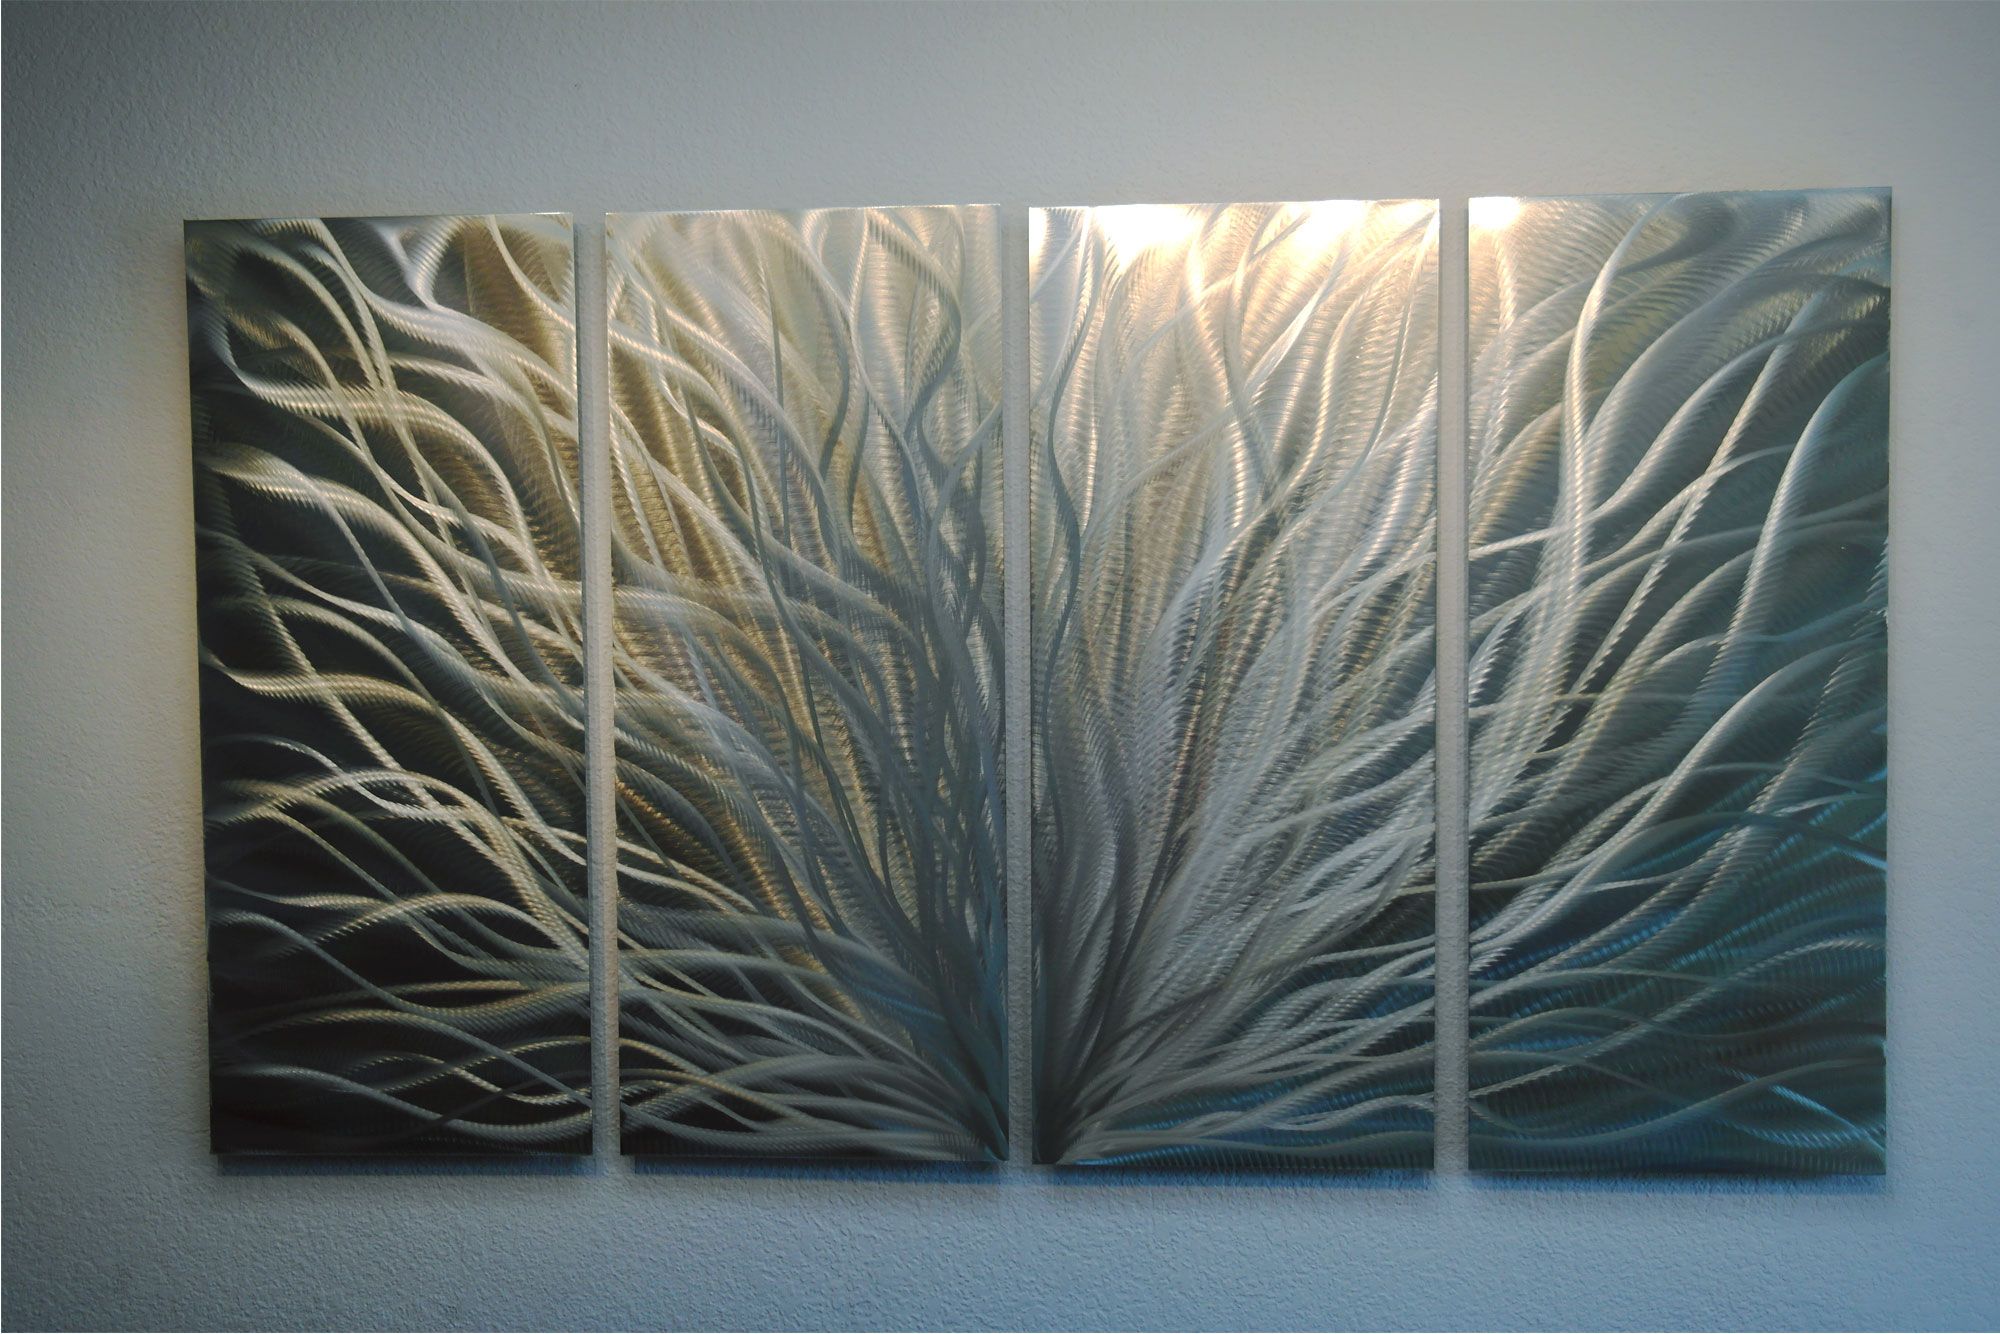 Radiance Silver And Gold 36x63 – Abstract Metal Wall Art Contemporary Intended For Most Popular Gold And White Metal Wall Art (View 18 of 20)